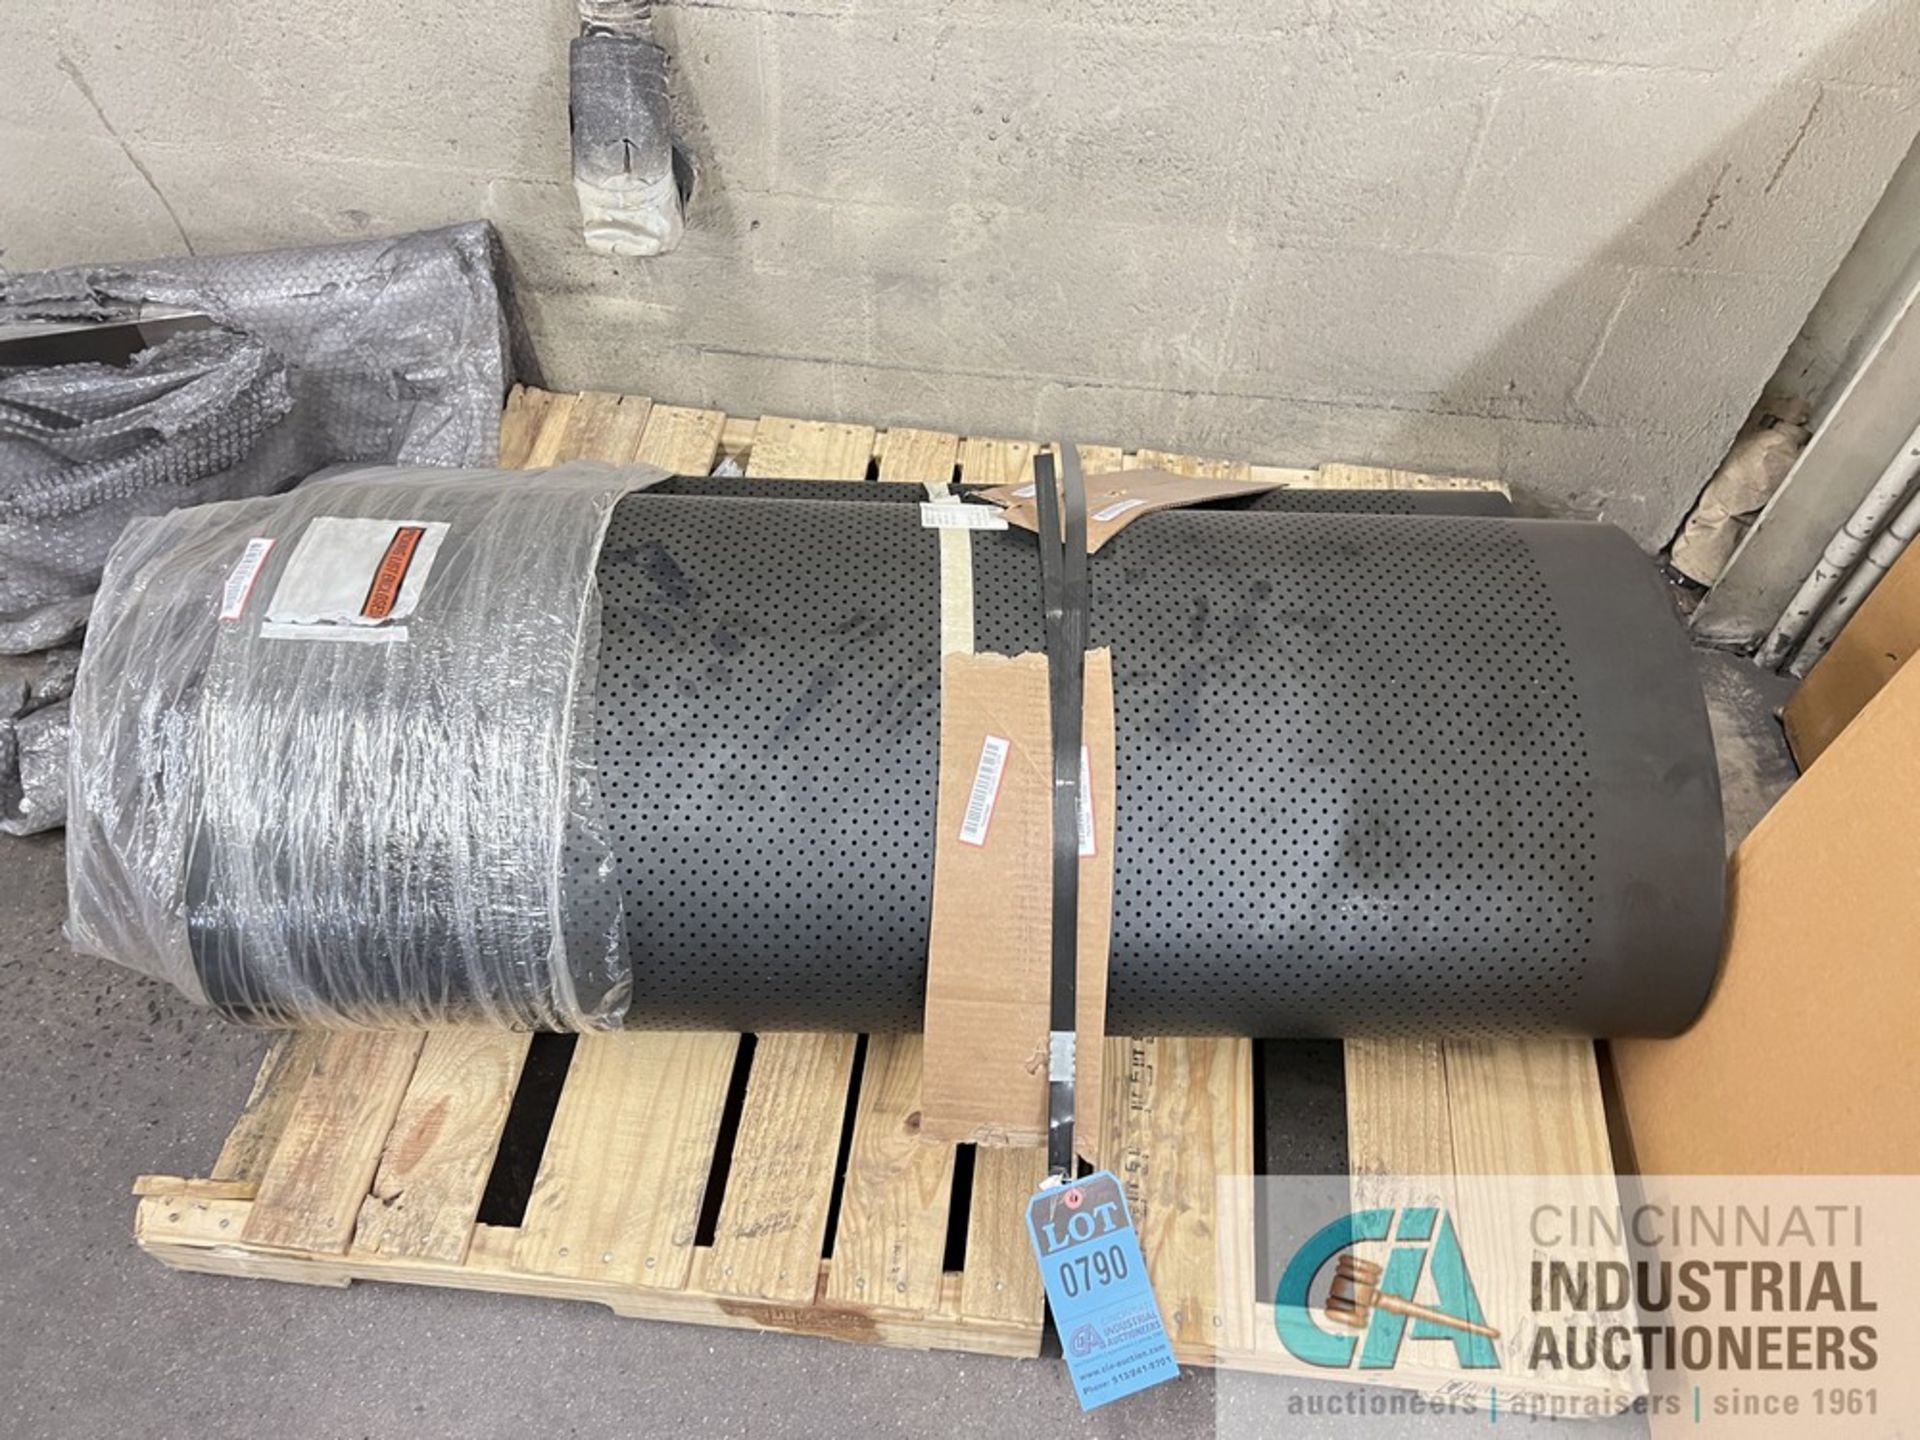 (LOT) 46" WIDE X 147" LONG METFIN RUBBER BELT AND (2) METFIN P/N 4800004 FILTERS (NEW) - Image 3 of 3